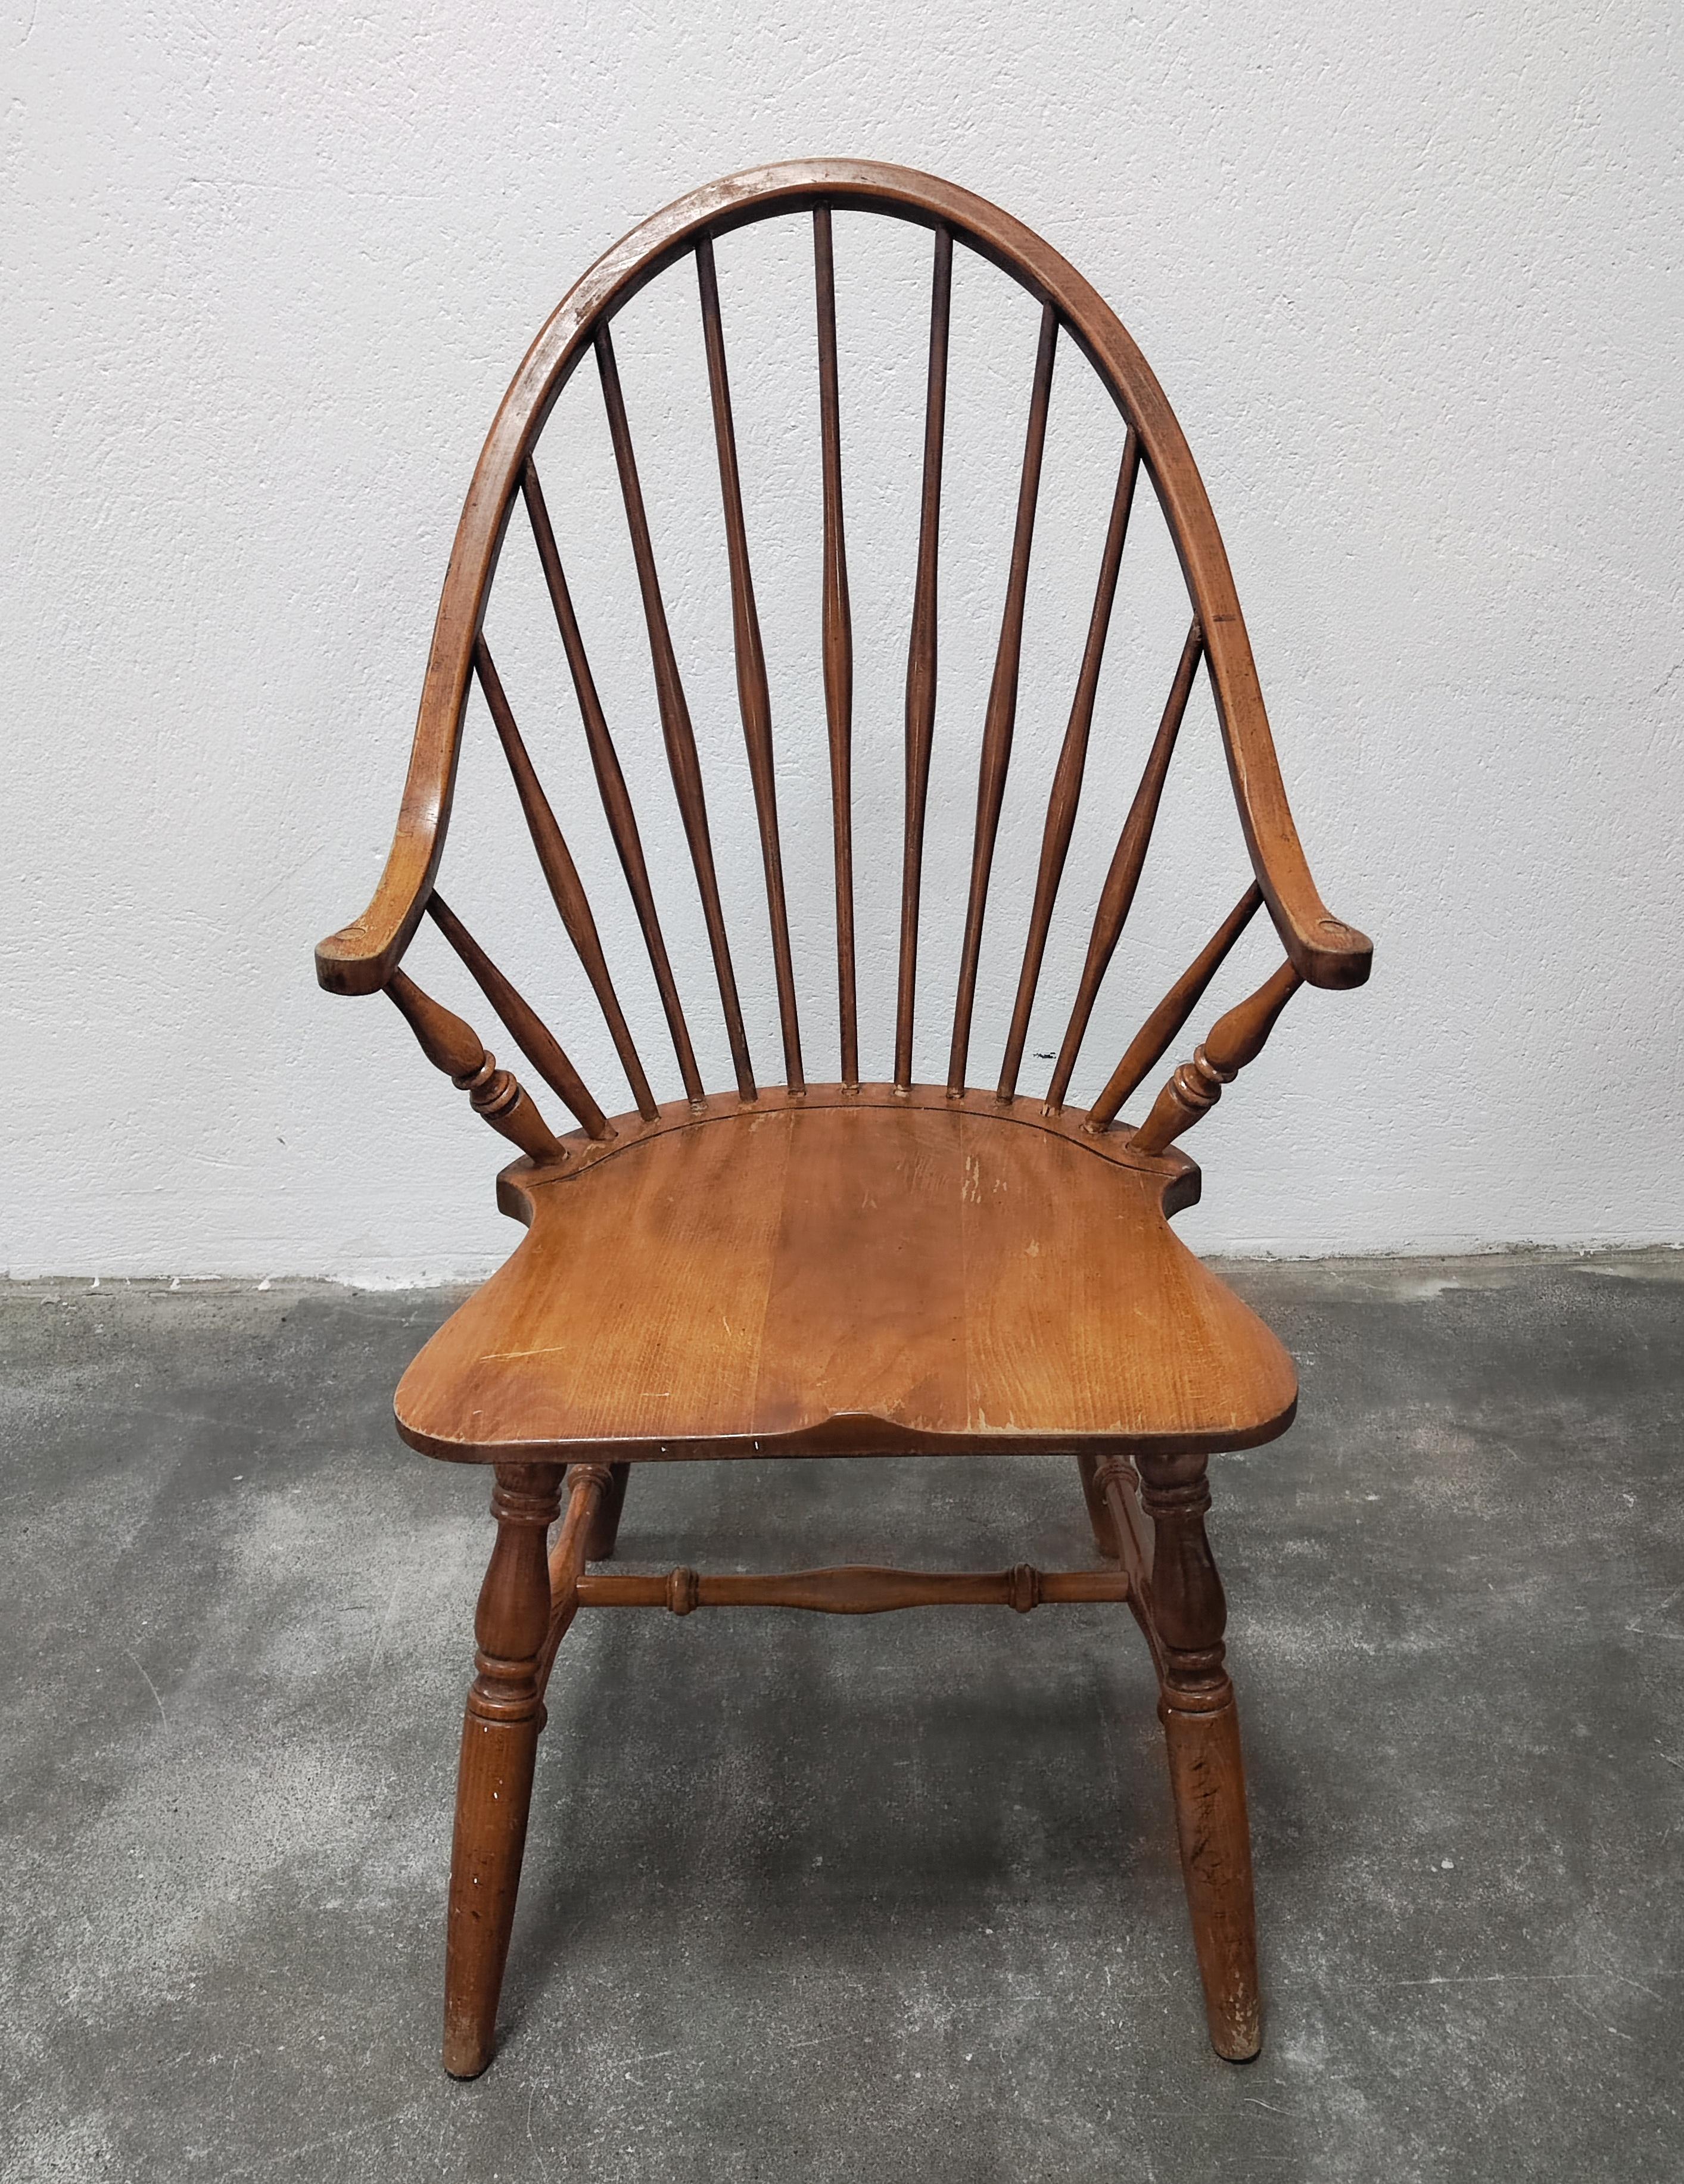 In this listing you will find 20 Windsor dining chairs and armchair done in solid Beech, manufactured in Yugoslavia in 1950s. There is 20 chairs available, out of which 10 are with and 10 without the armrests.

They feature tall spindle back, making